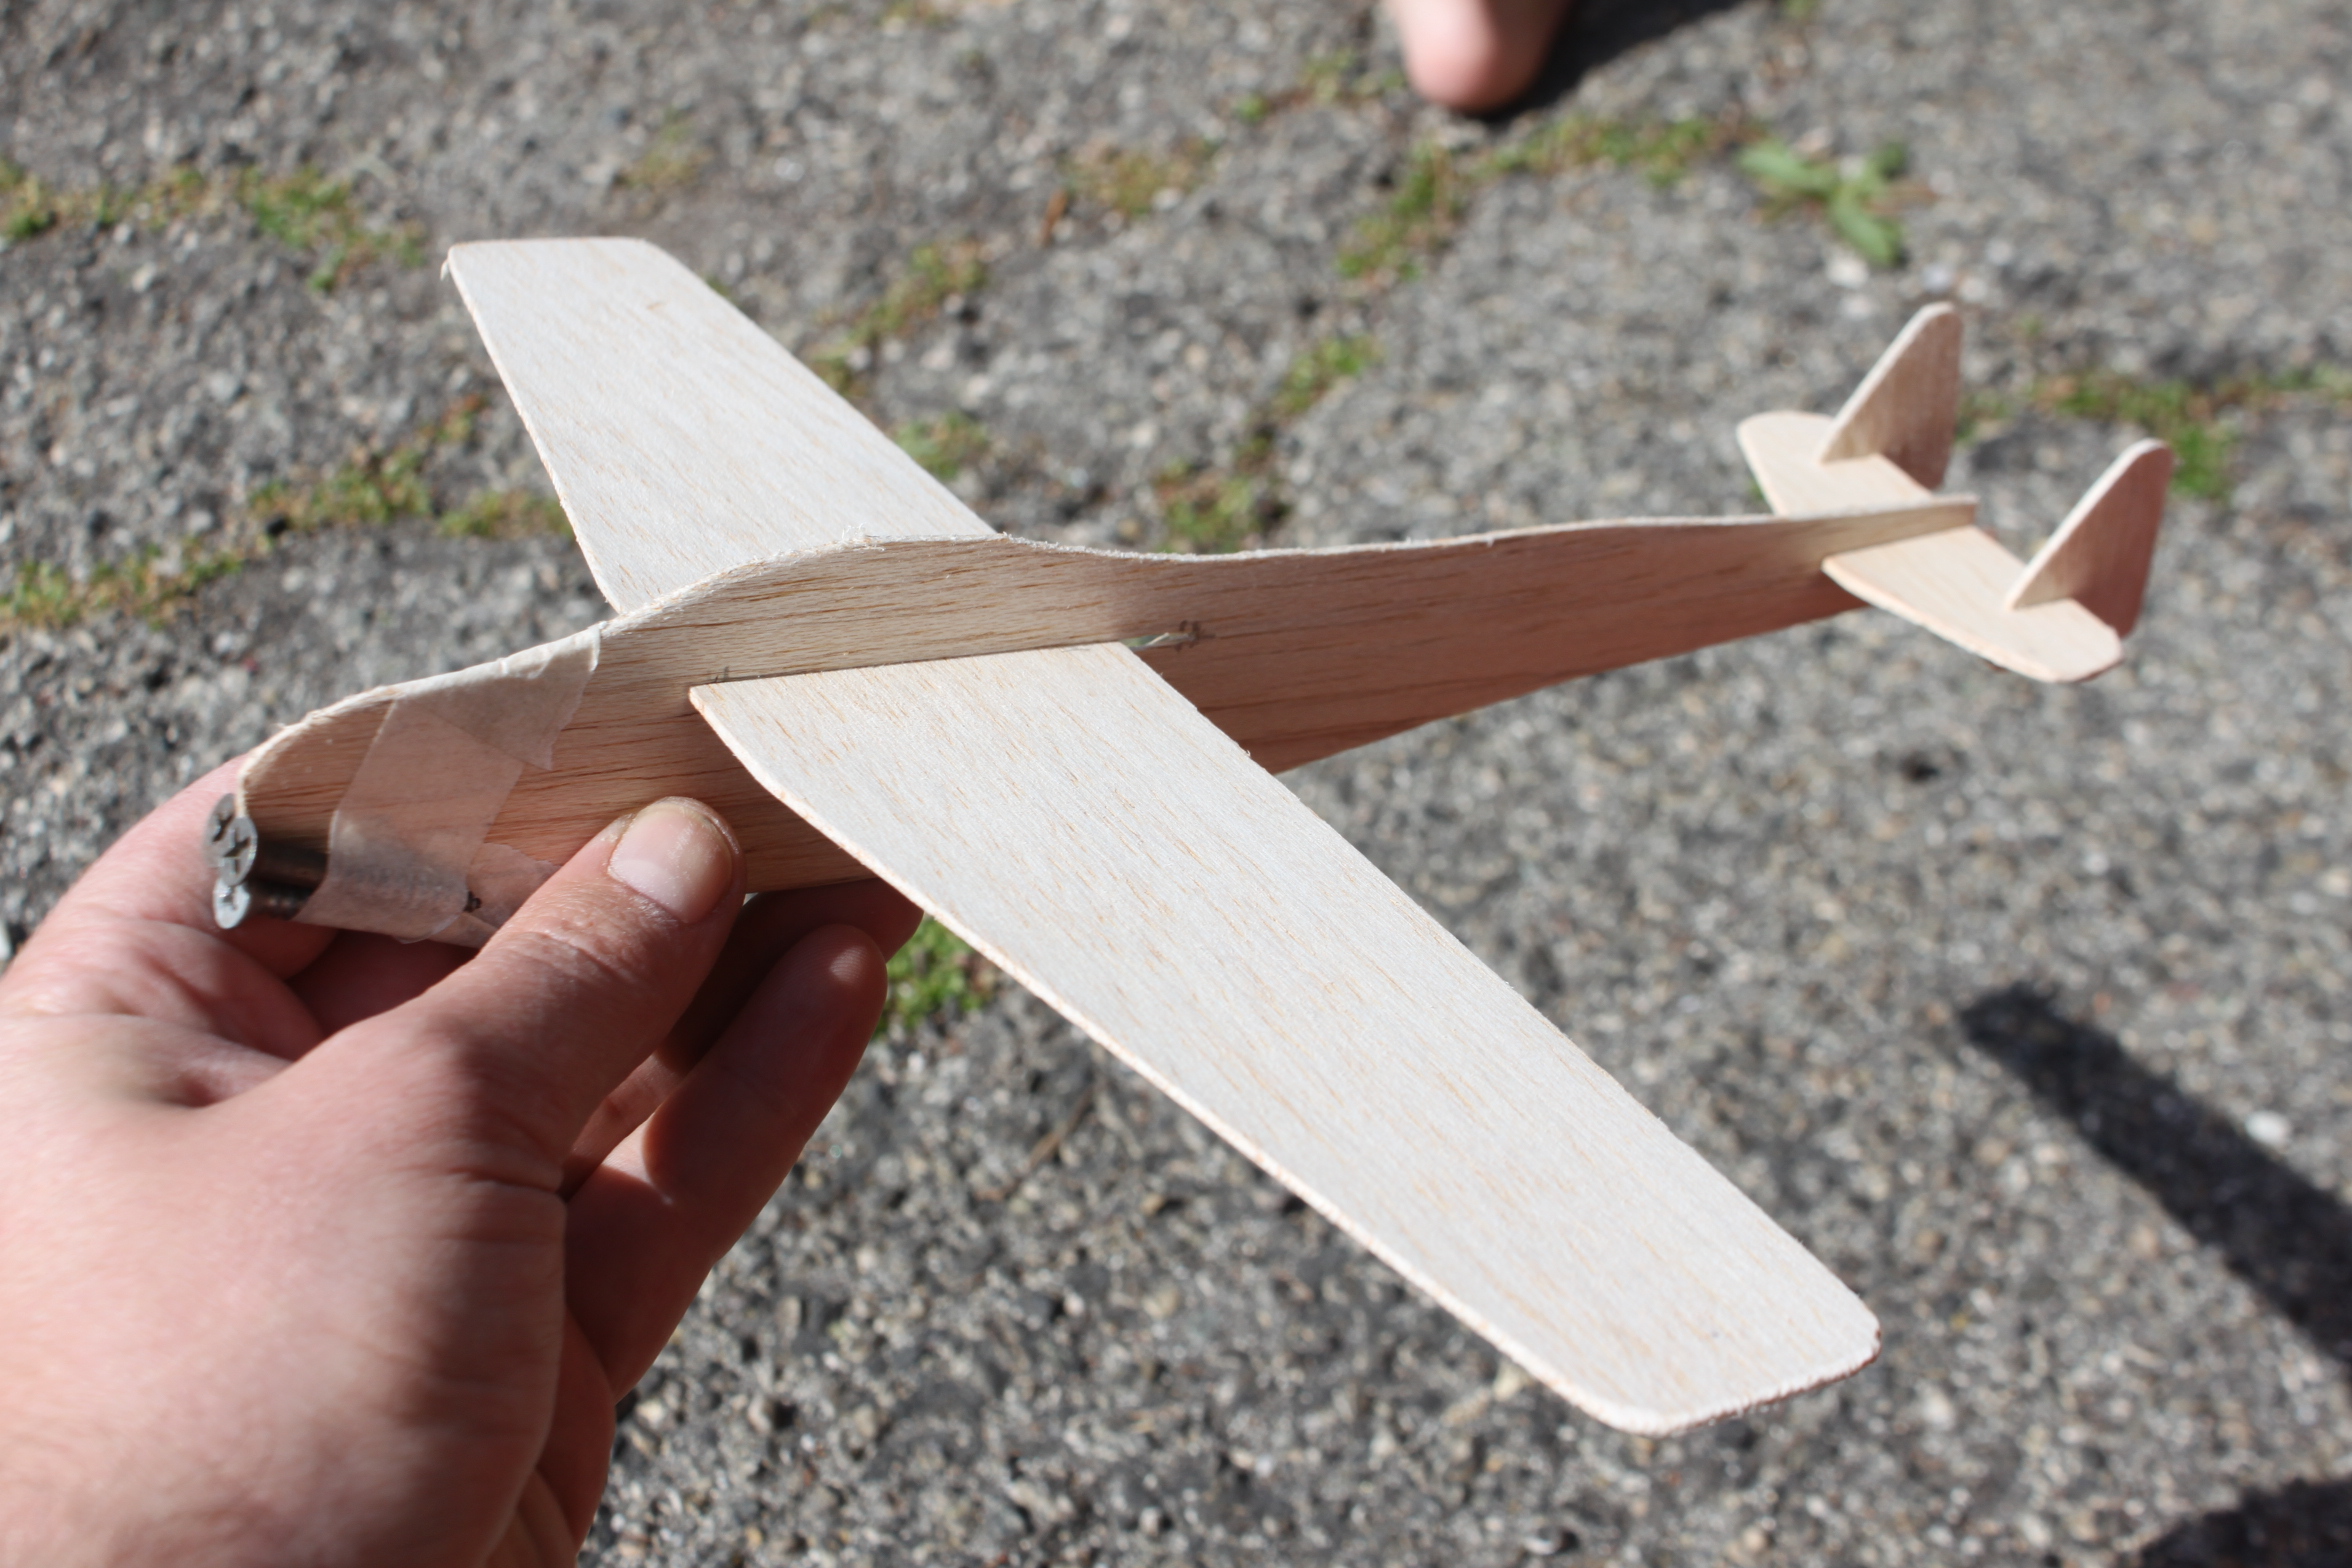 How To Build A Balsa Wood Glider Plans diy treehouse plans 